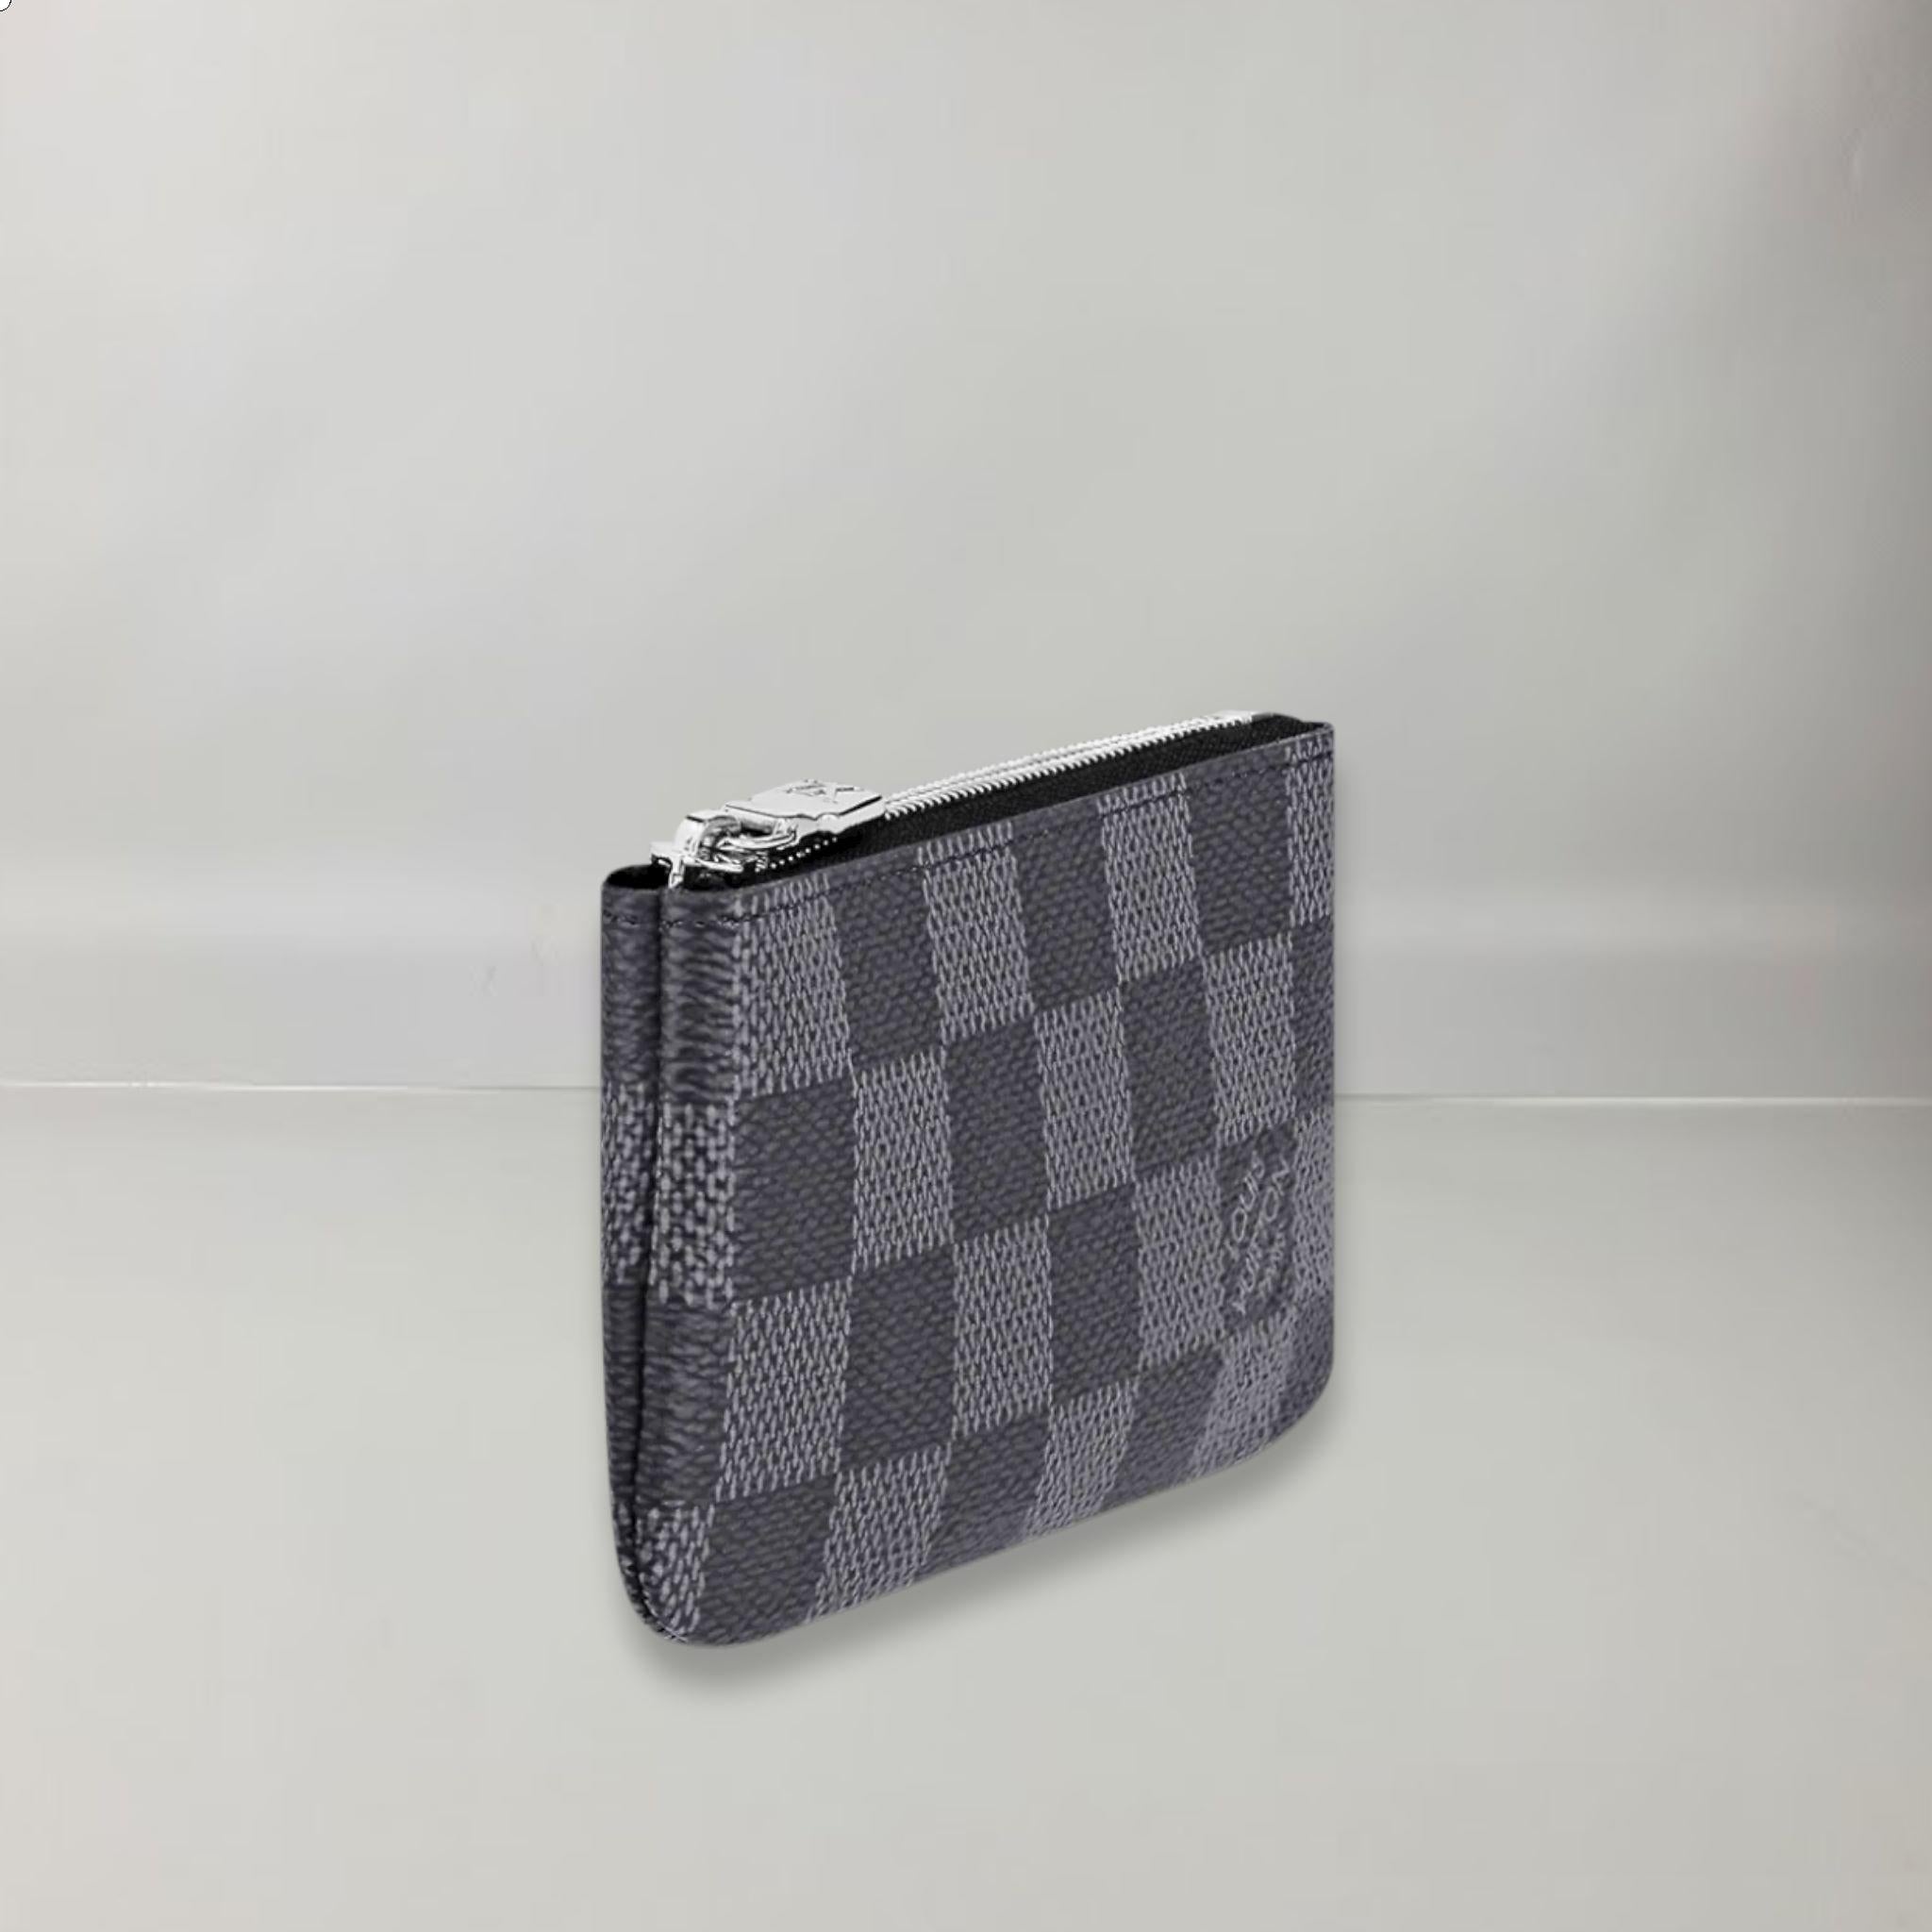 Checkered Graphite Canvas, Cowhide lining, Silver metallic finishes, zipper, Keychains and chain with hook